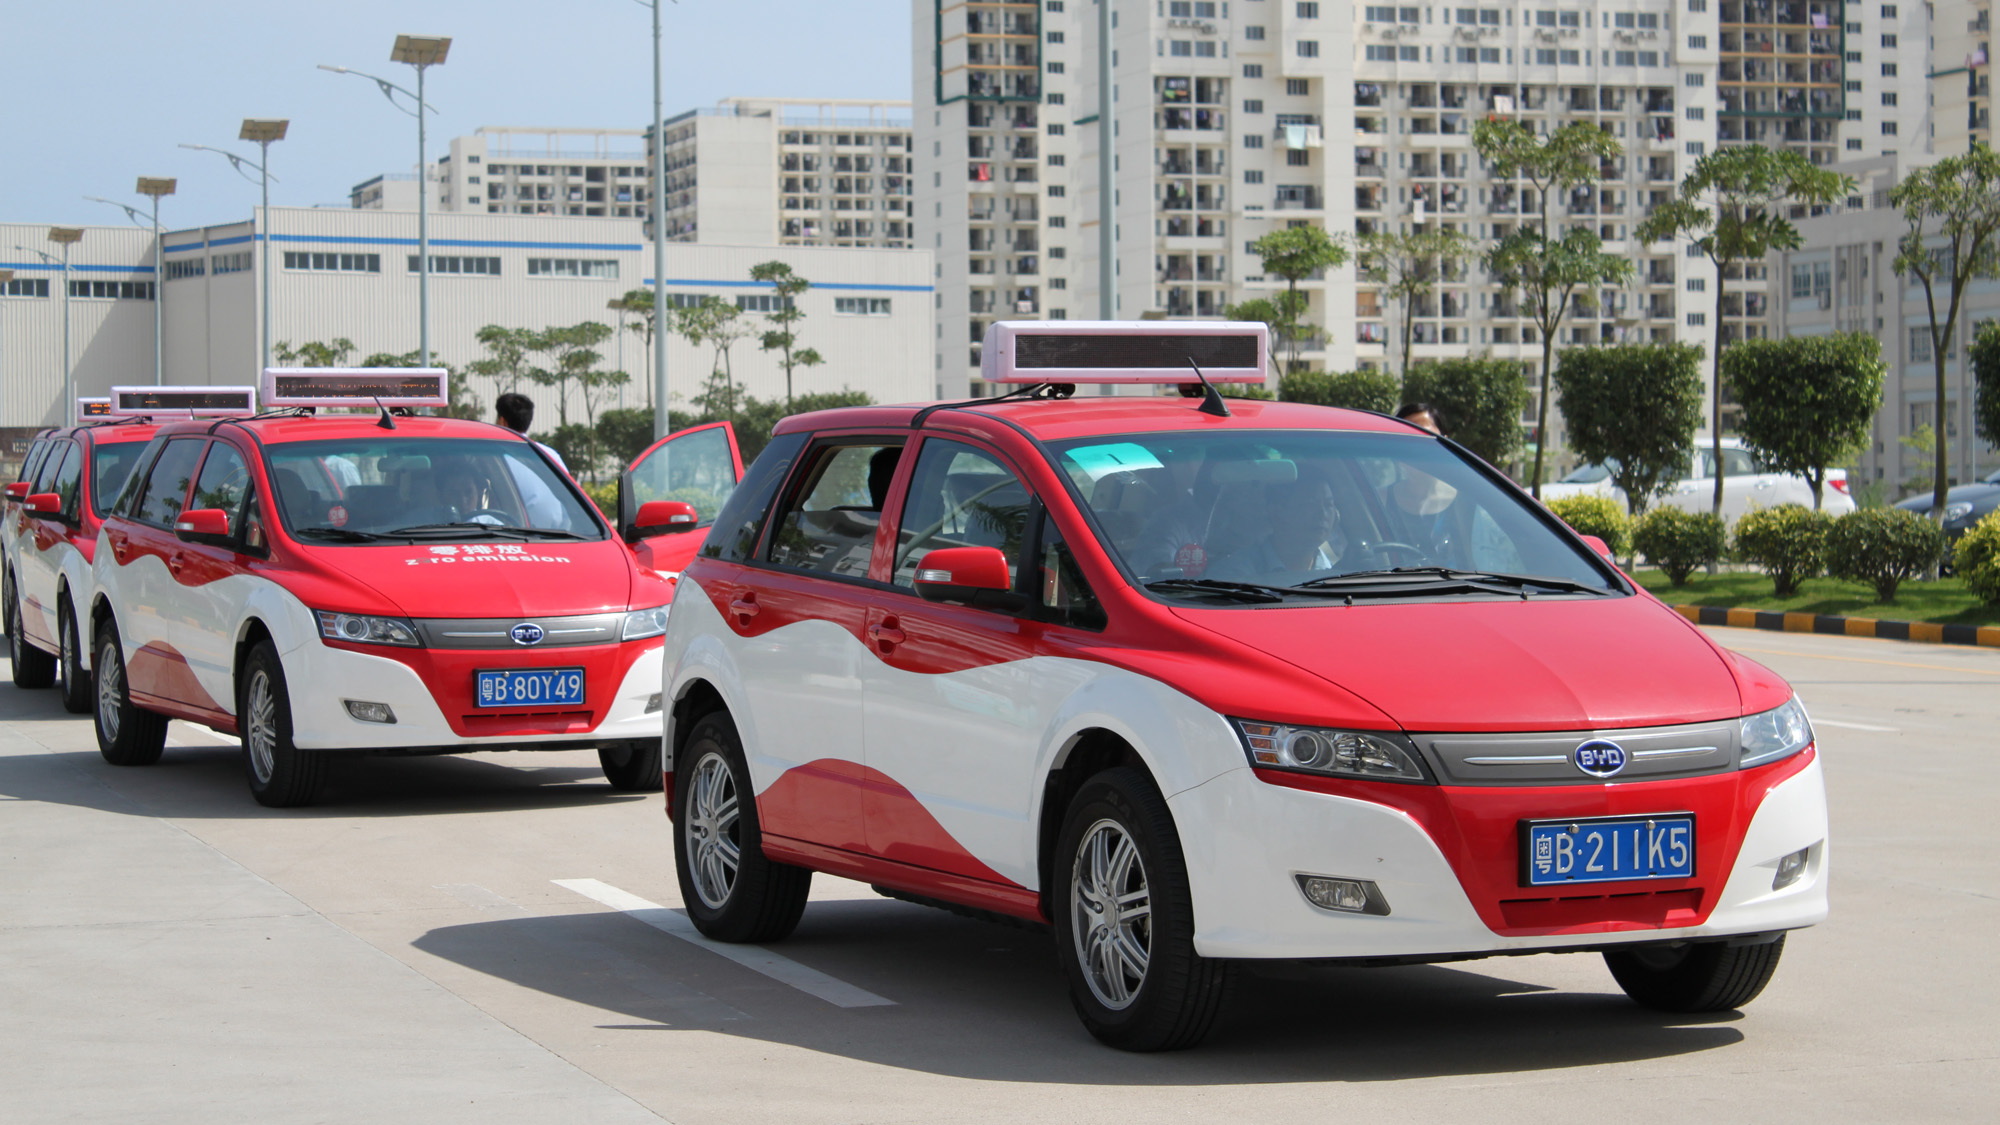 BYD e6 electric taxi in service in Shenzhen, China